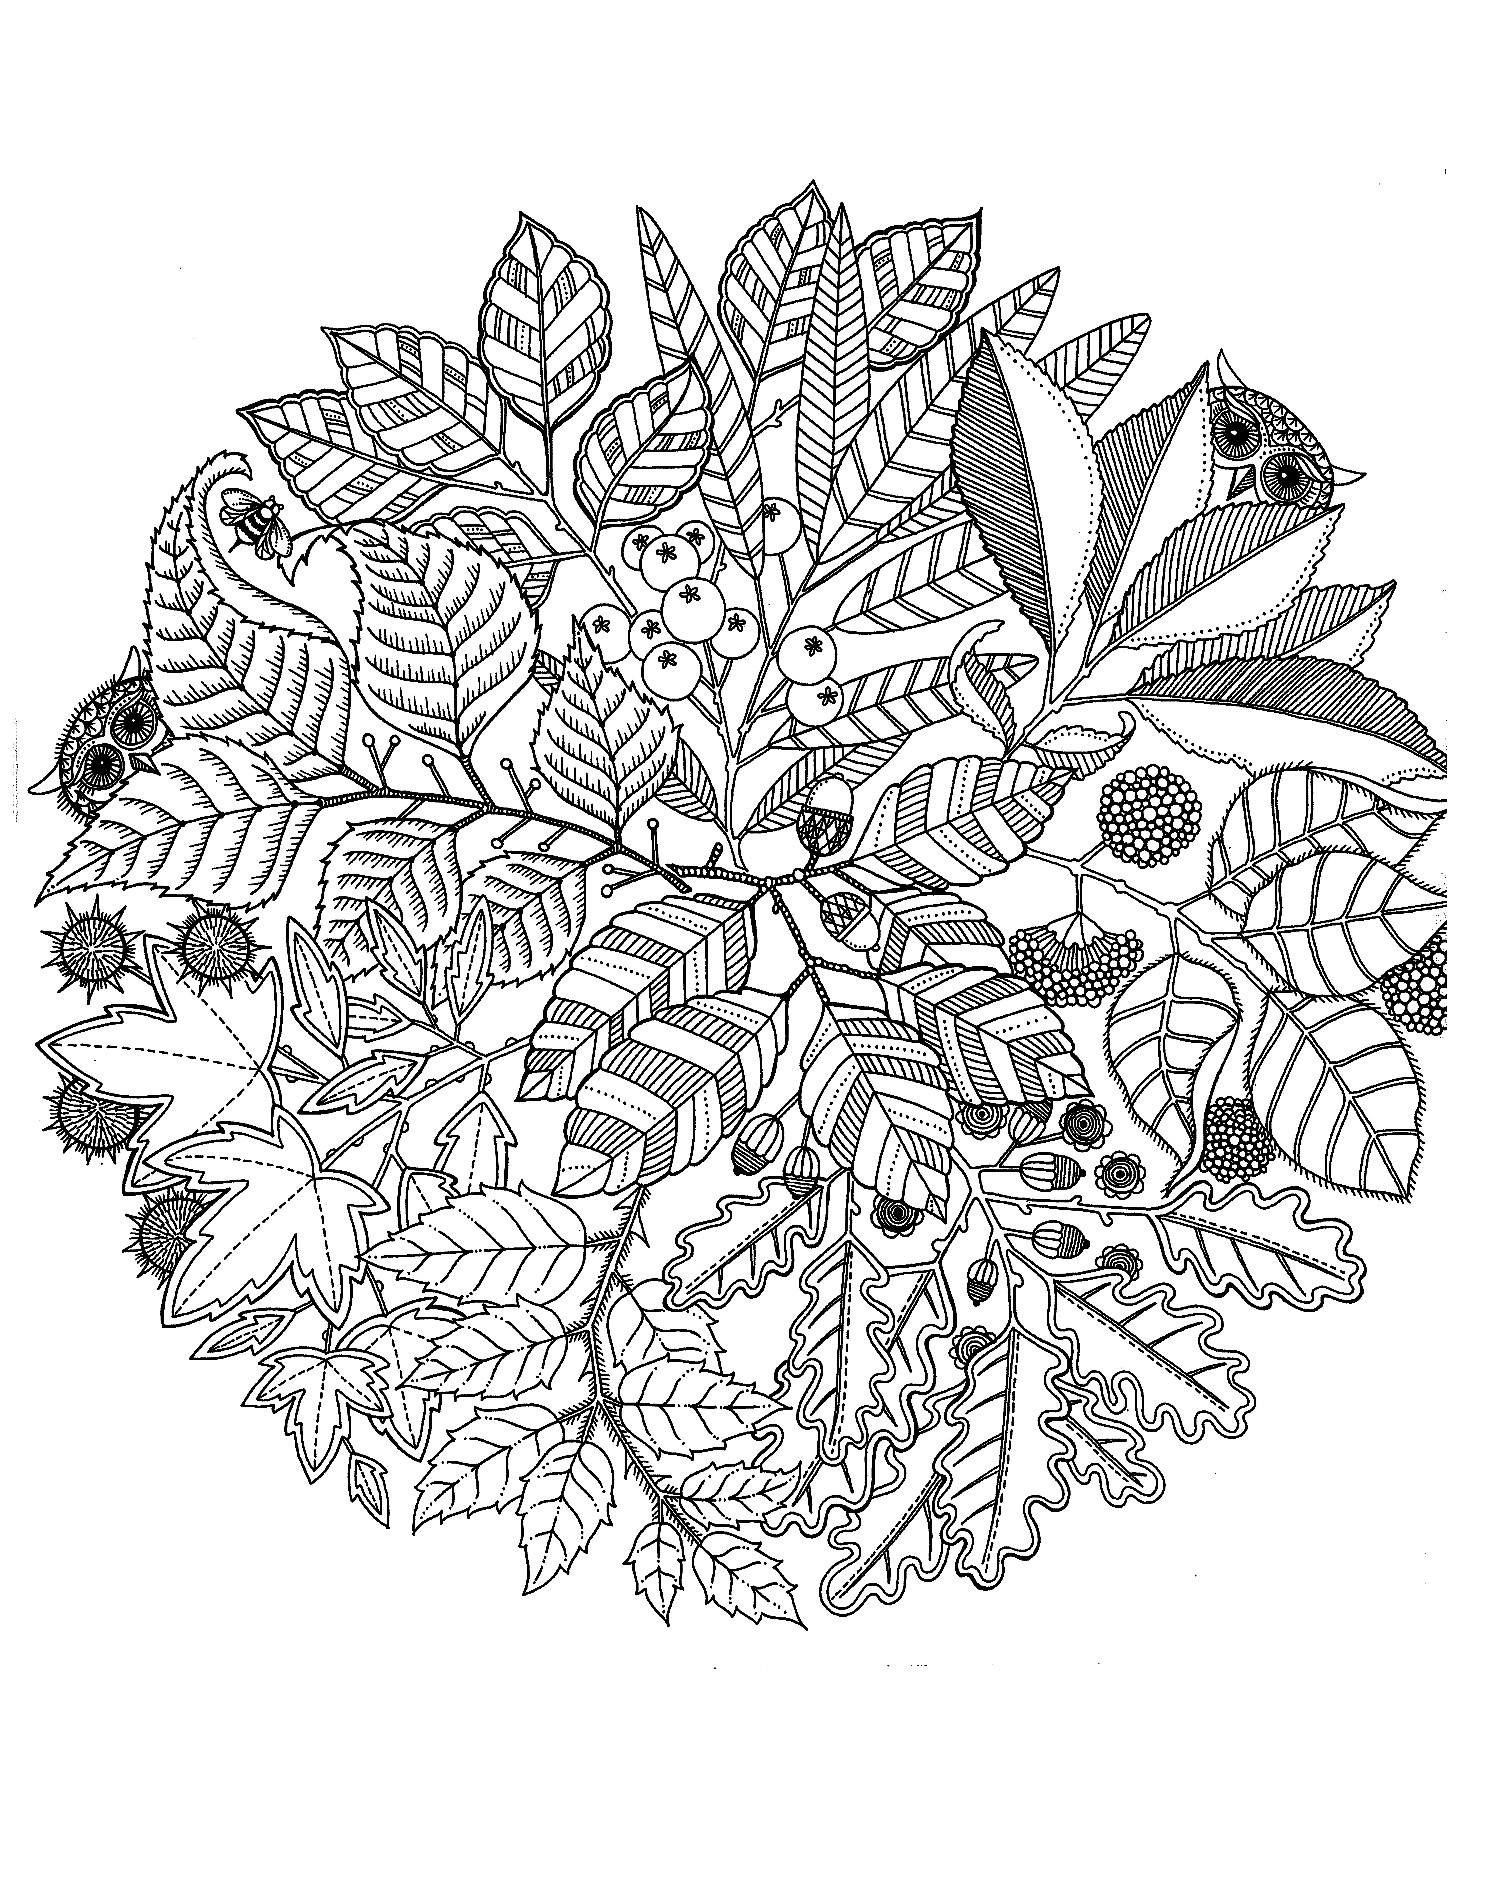 A Mandala composed of leaves and berries, behind which hides discreet owls